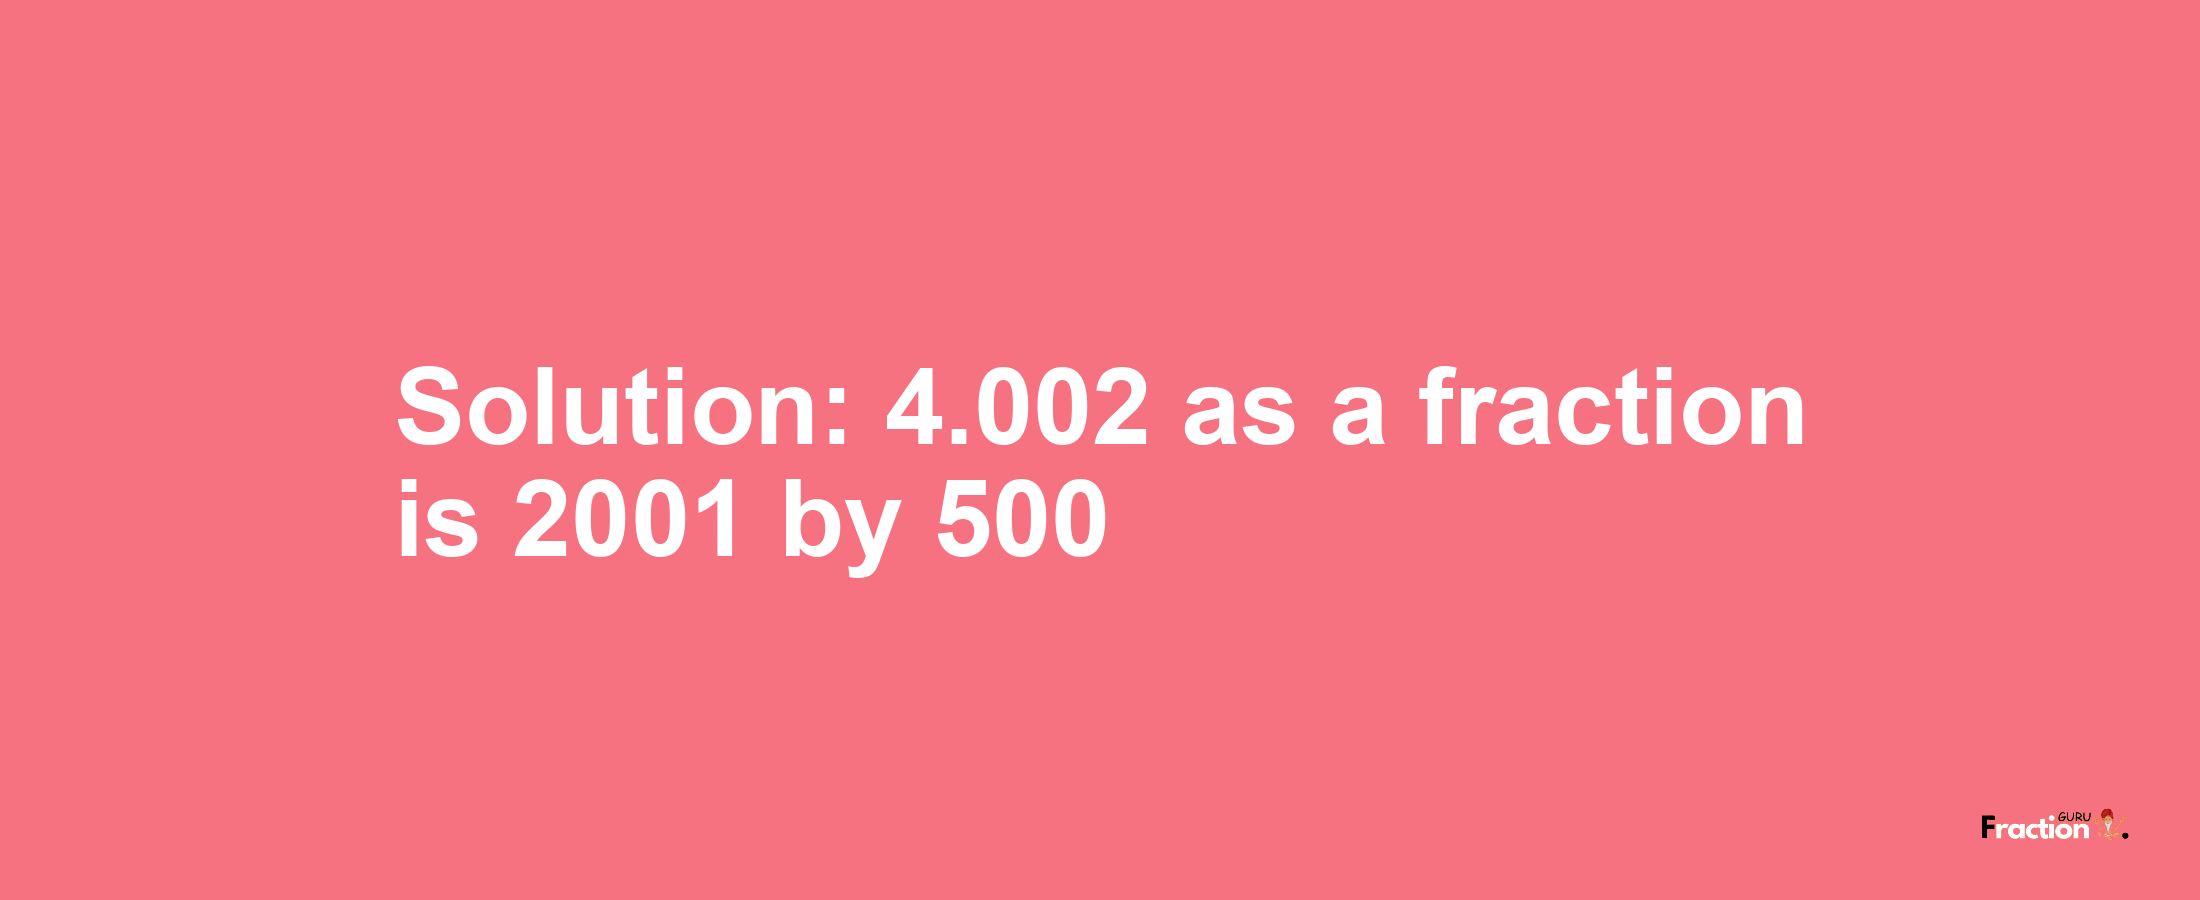 Solution:4.002 as a fraction is 2001/500